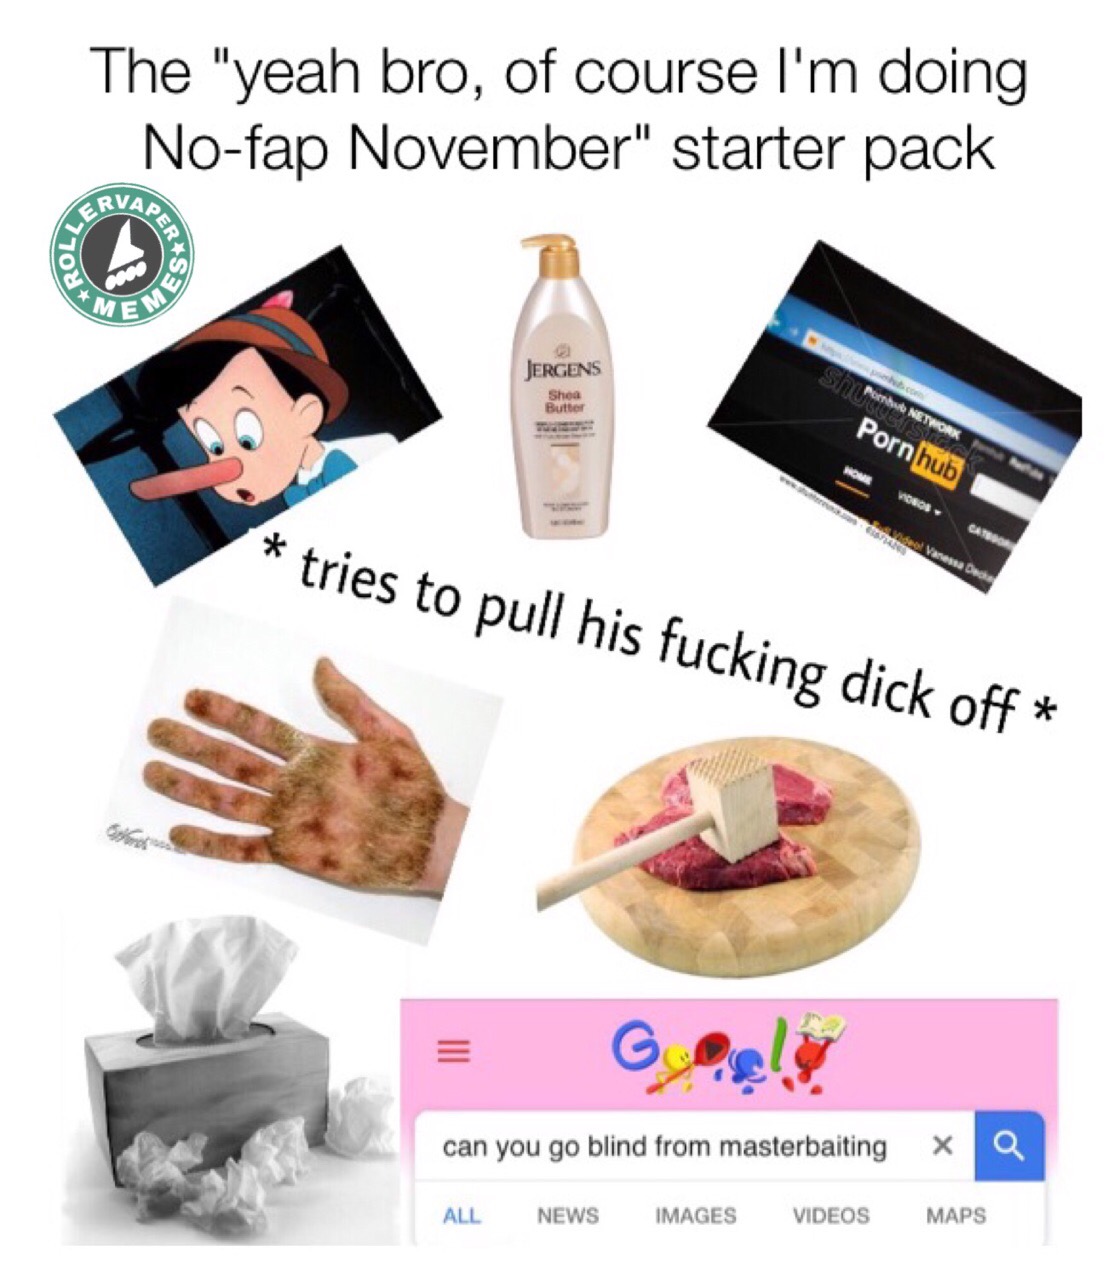 food - The "yeah bro, of course I'm doing Nofap November" starter pack Nap, M Jergens Shea Butter Network Pornhub Wome Vanessa tries to pull his fucking dick off can you go blind from masterbaiting x a All News Images Videos Maps